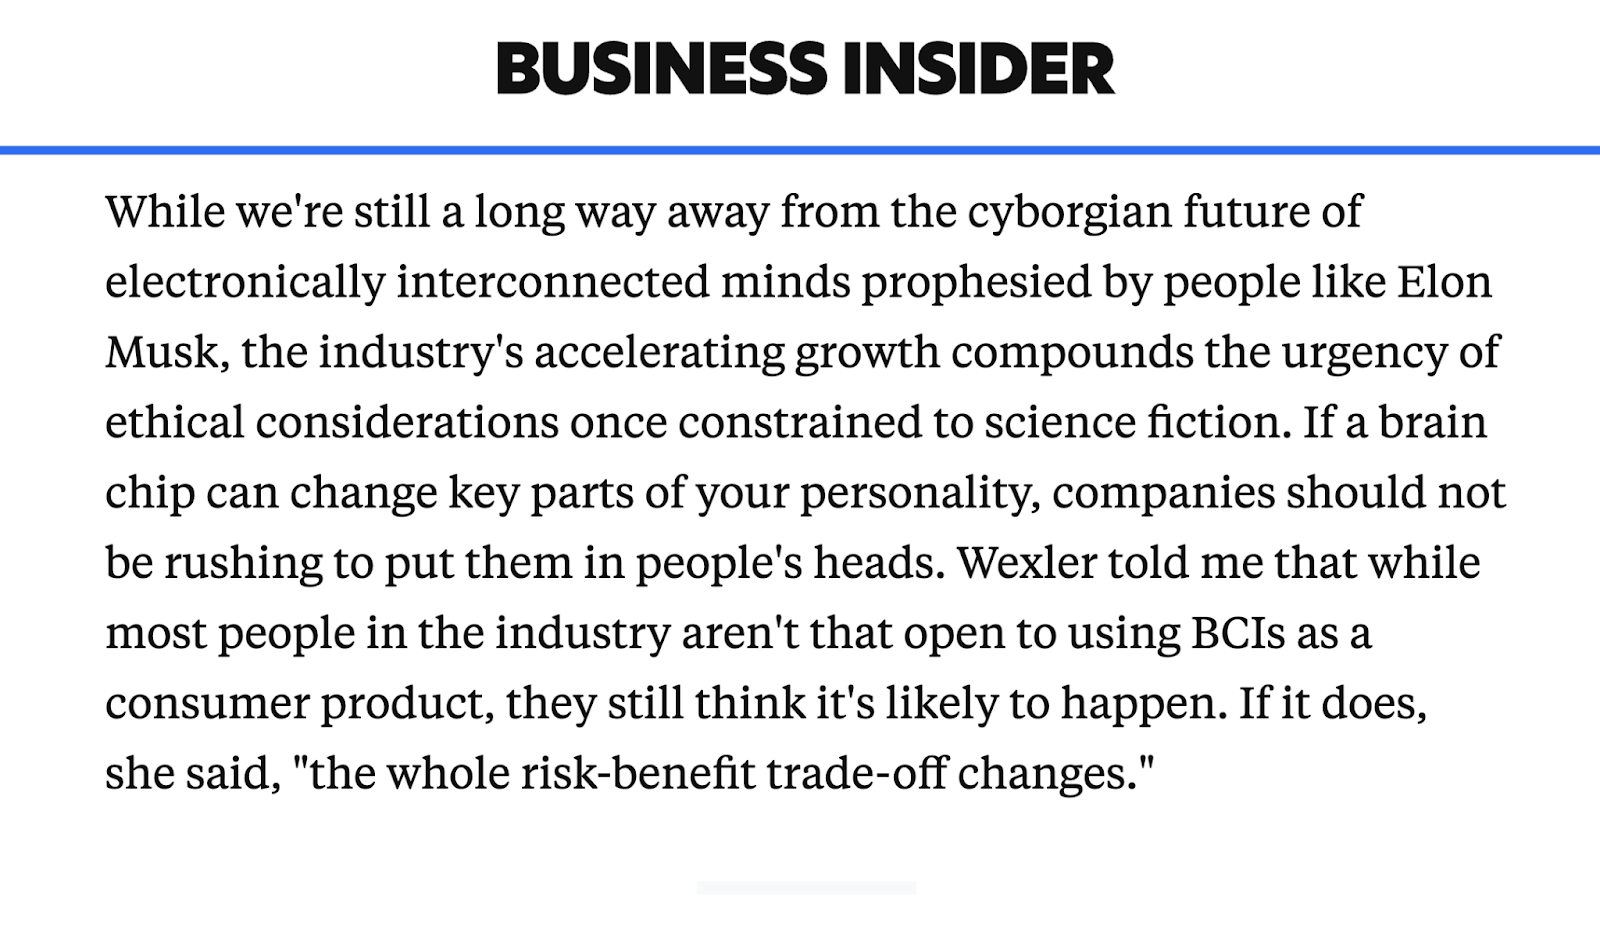 An illustration  of a provocative decision  from Business Insider's nonfiction  connected  Elon Musk's Neuralink encephalon  chip